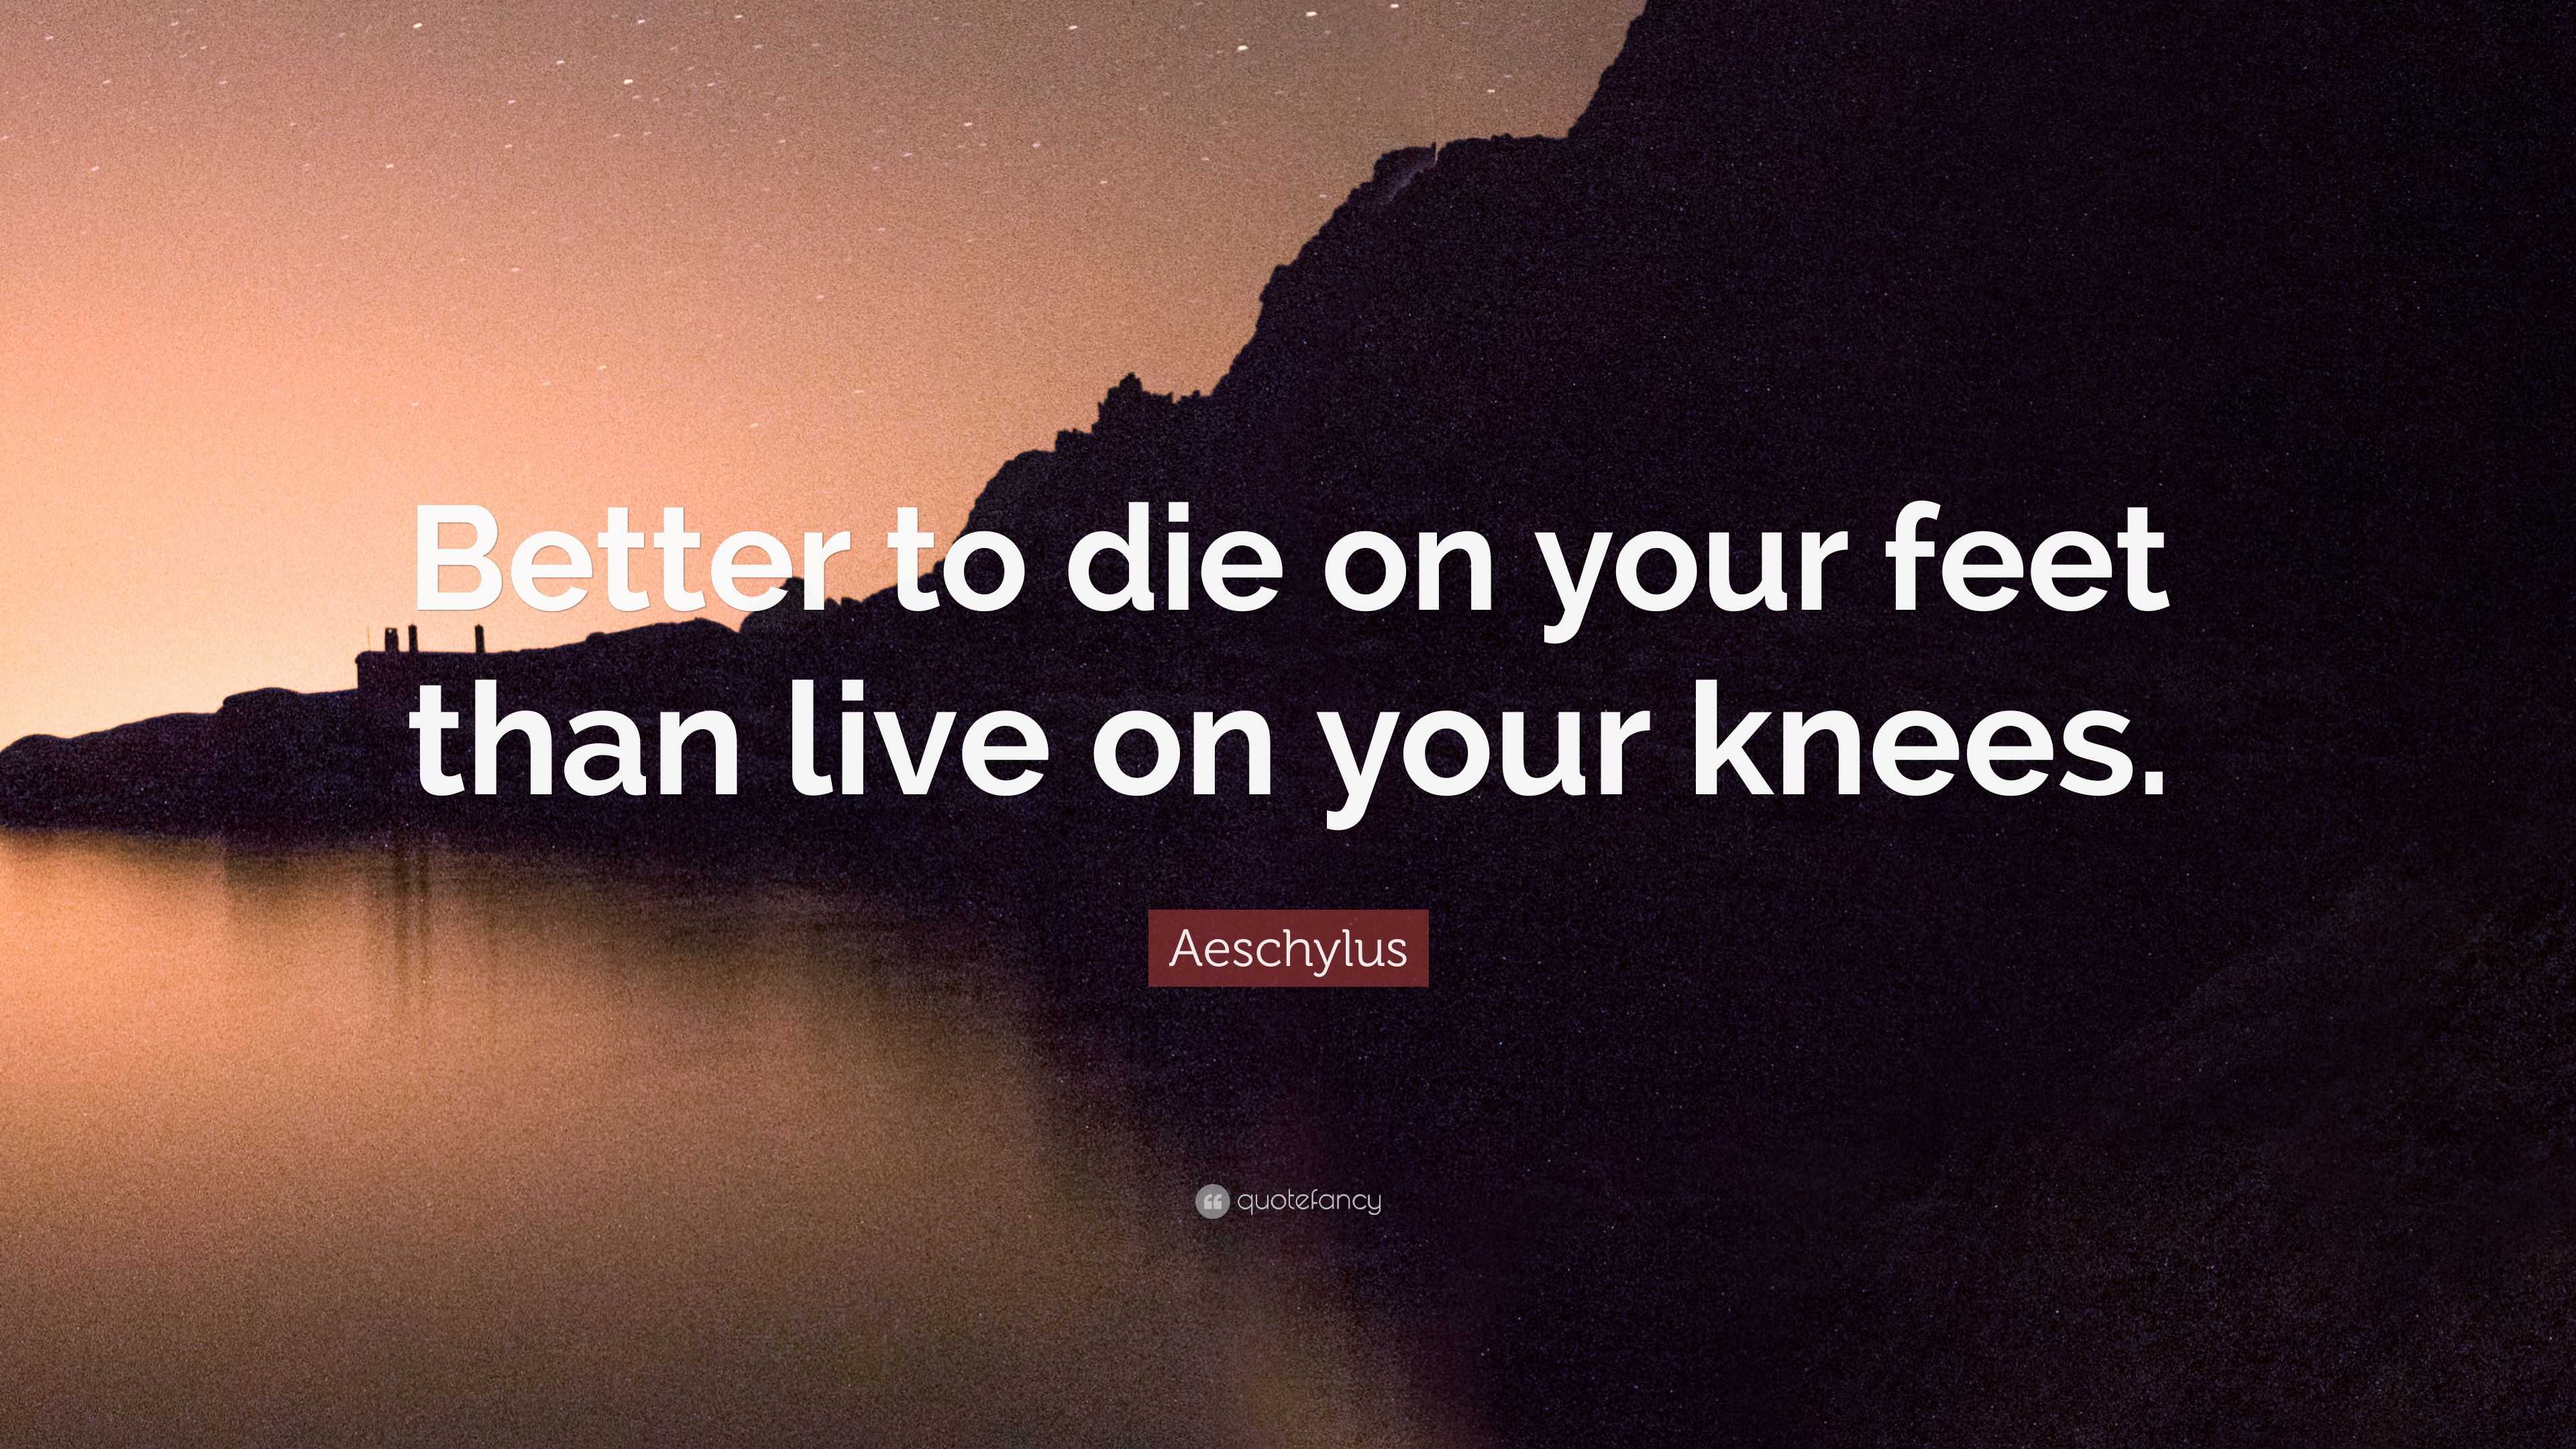 Aeschylus Quote: “Better to die on your feet than live on your knees.”